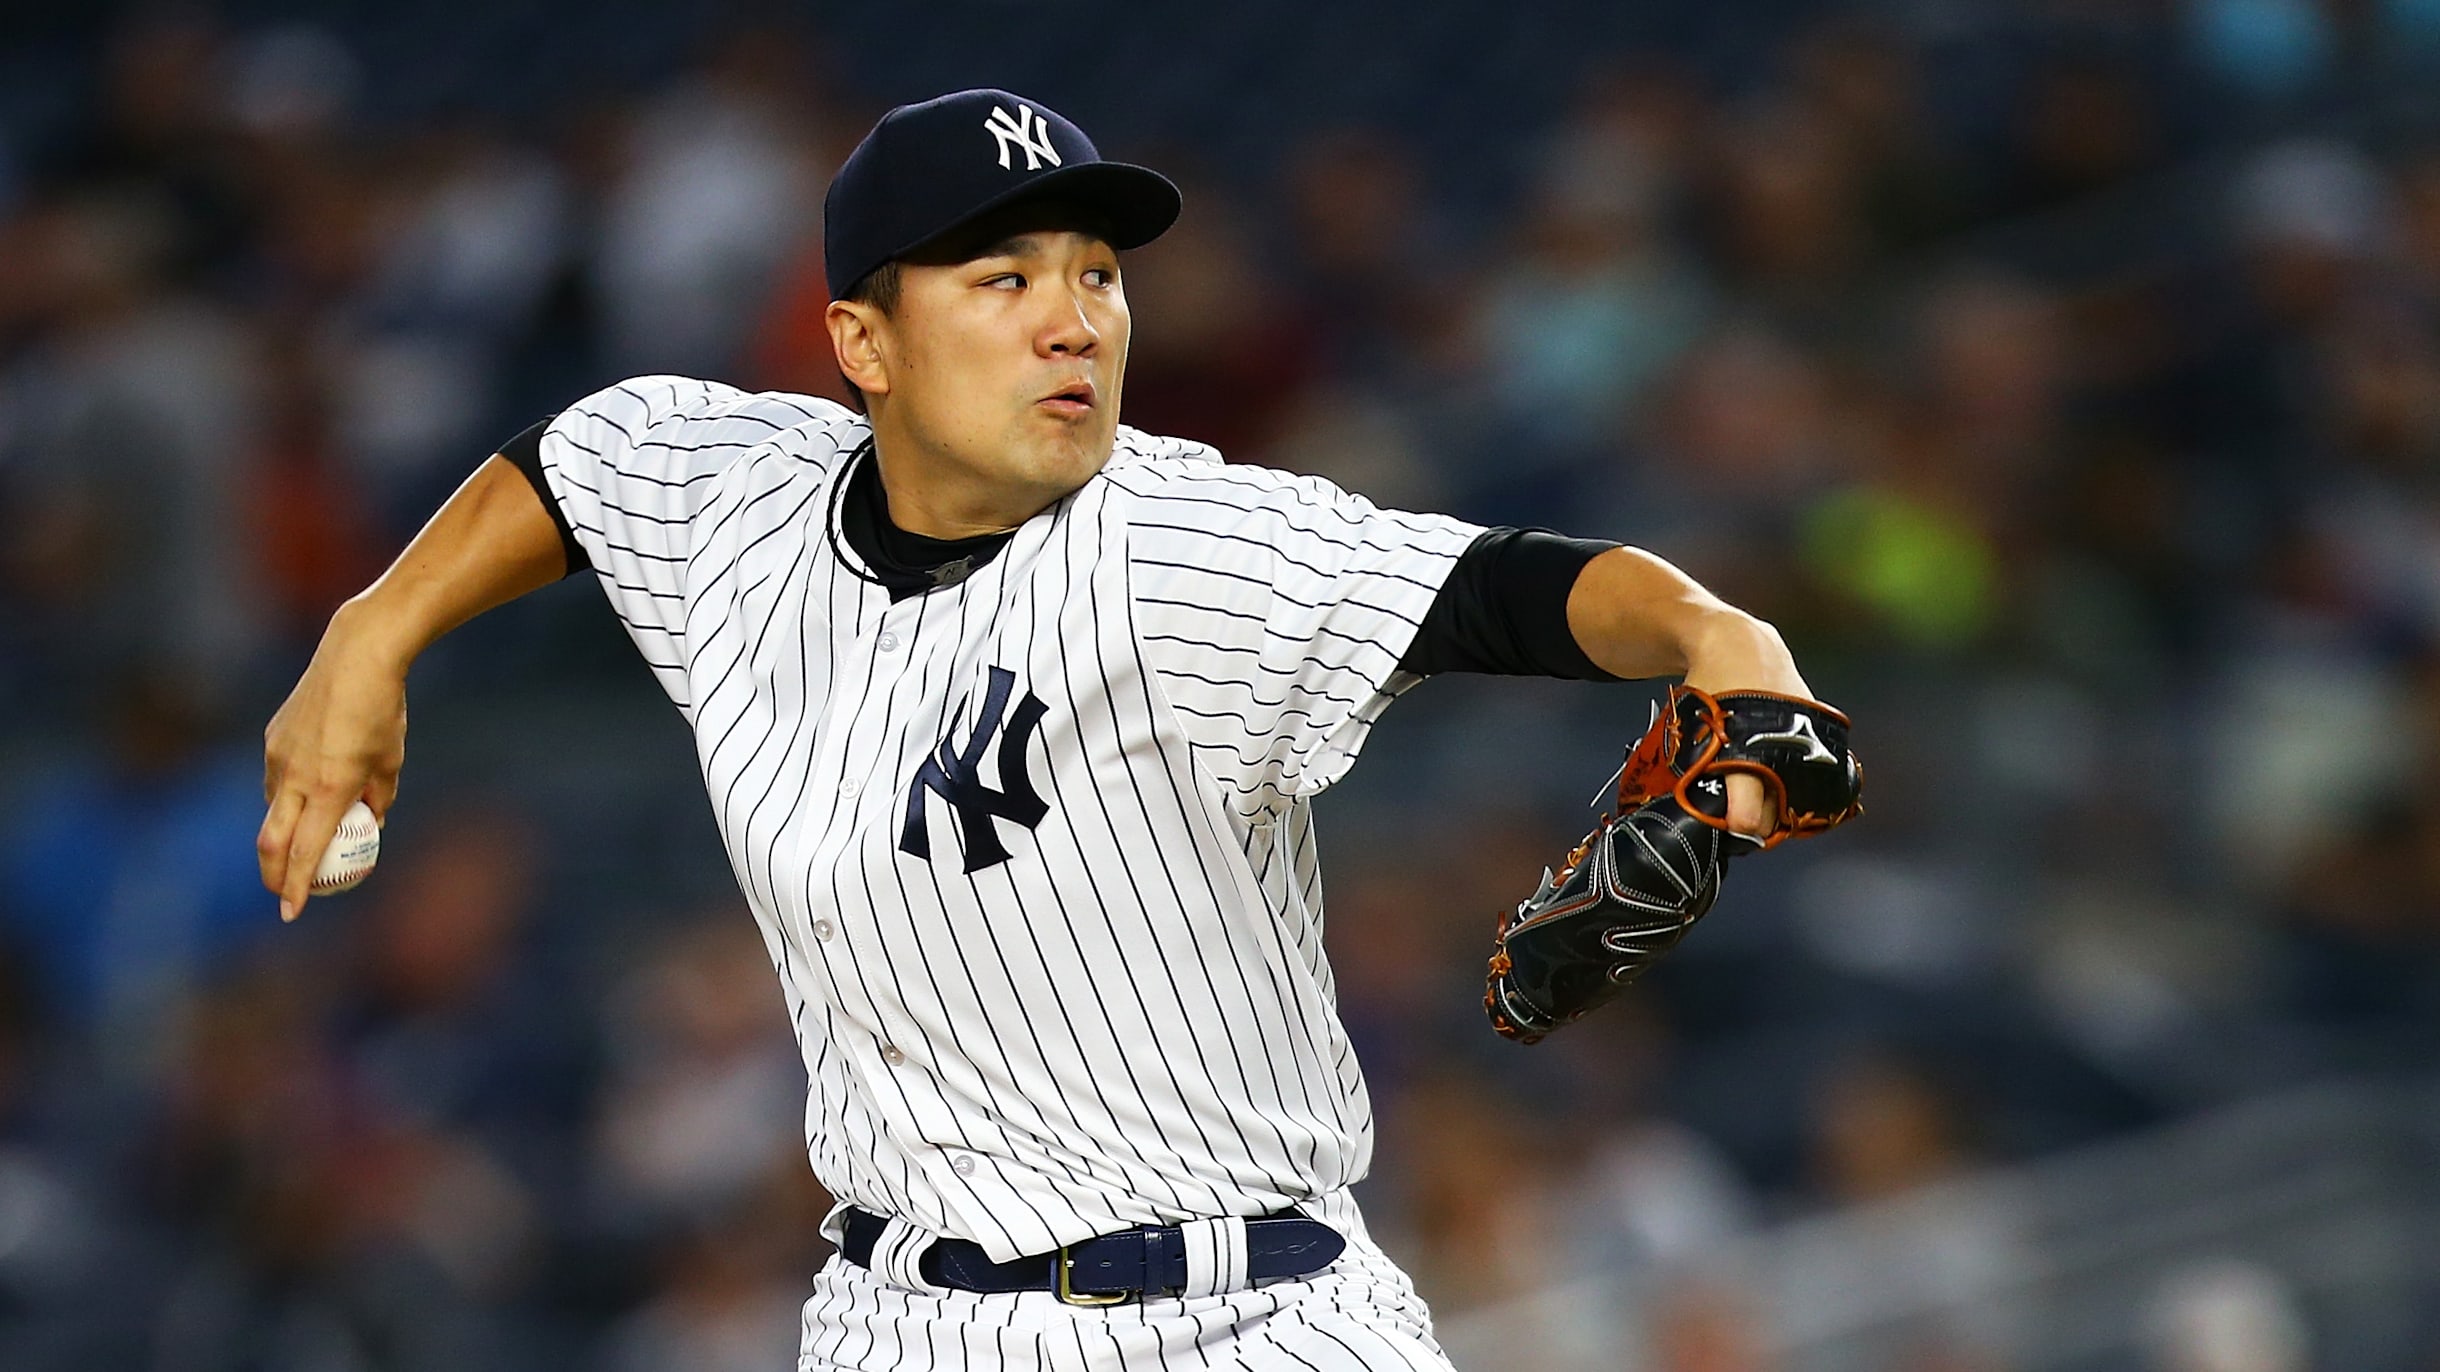 Tanaka aims to show Japanese fans he 'improved' with Yankees